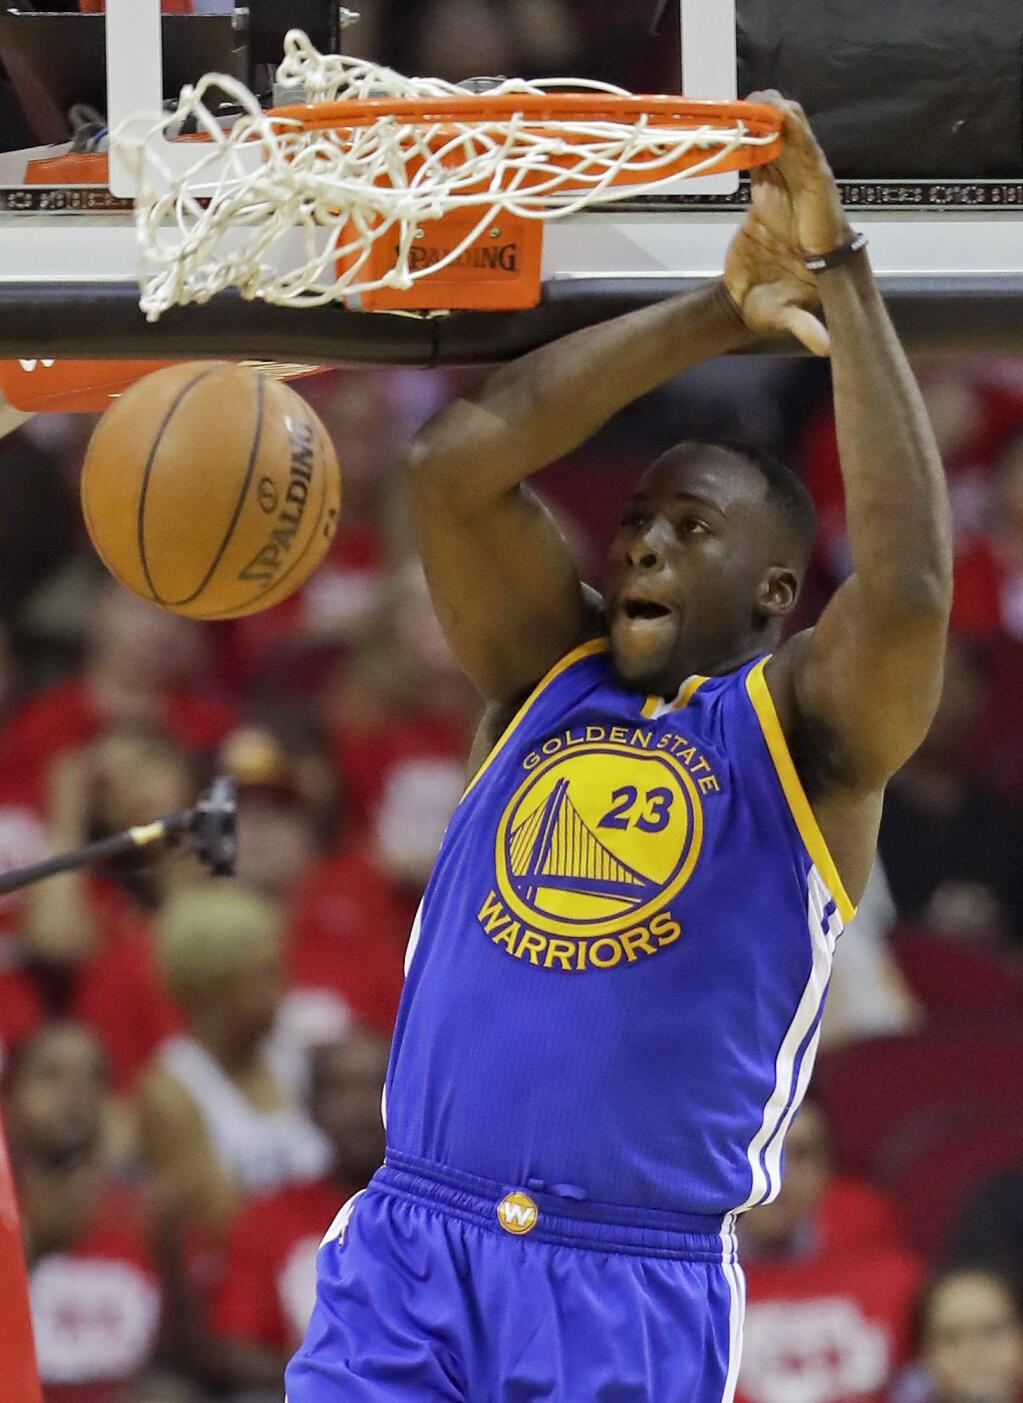 FILe - In this April 21, 2016, file photo, Golden State Warriors forward Draymond Green dunks against the Houston Rockets during the second half in Game 3 of a first-round NBA basketball playoff series, in Houston. Green was arrested for an alleged assault over the weekend in East Lansing, Michigan, according to online court records.The incident occurred around 2:30 a.m. Sunday, July 10, 2016, in the city where Green played for Michigan State from 2008-12.(AP Photo/David J. Phillip, File)